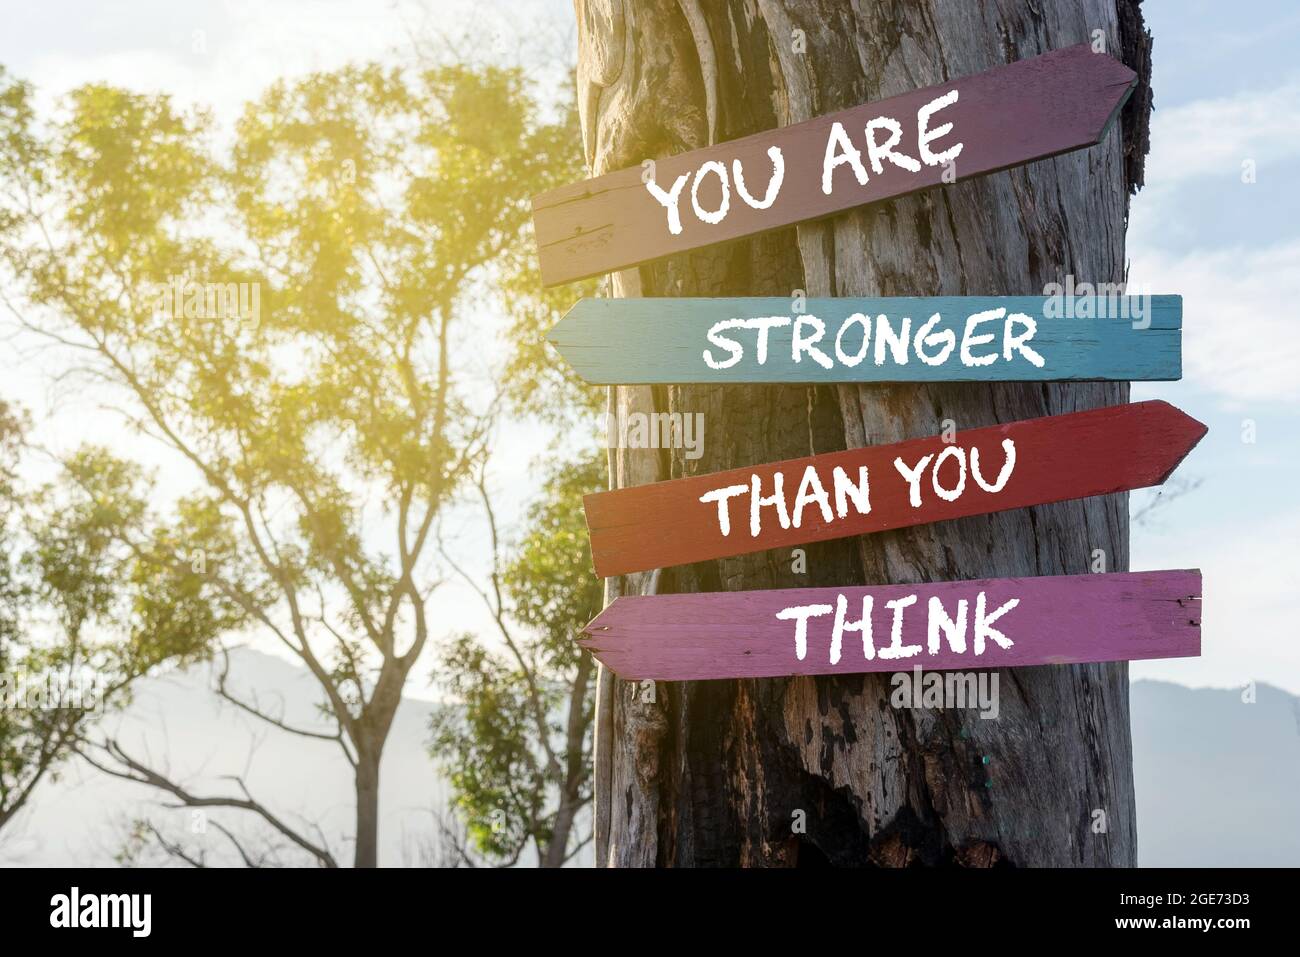 You Are Stronger Than You Think Inspirational Quotes Stock Photo